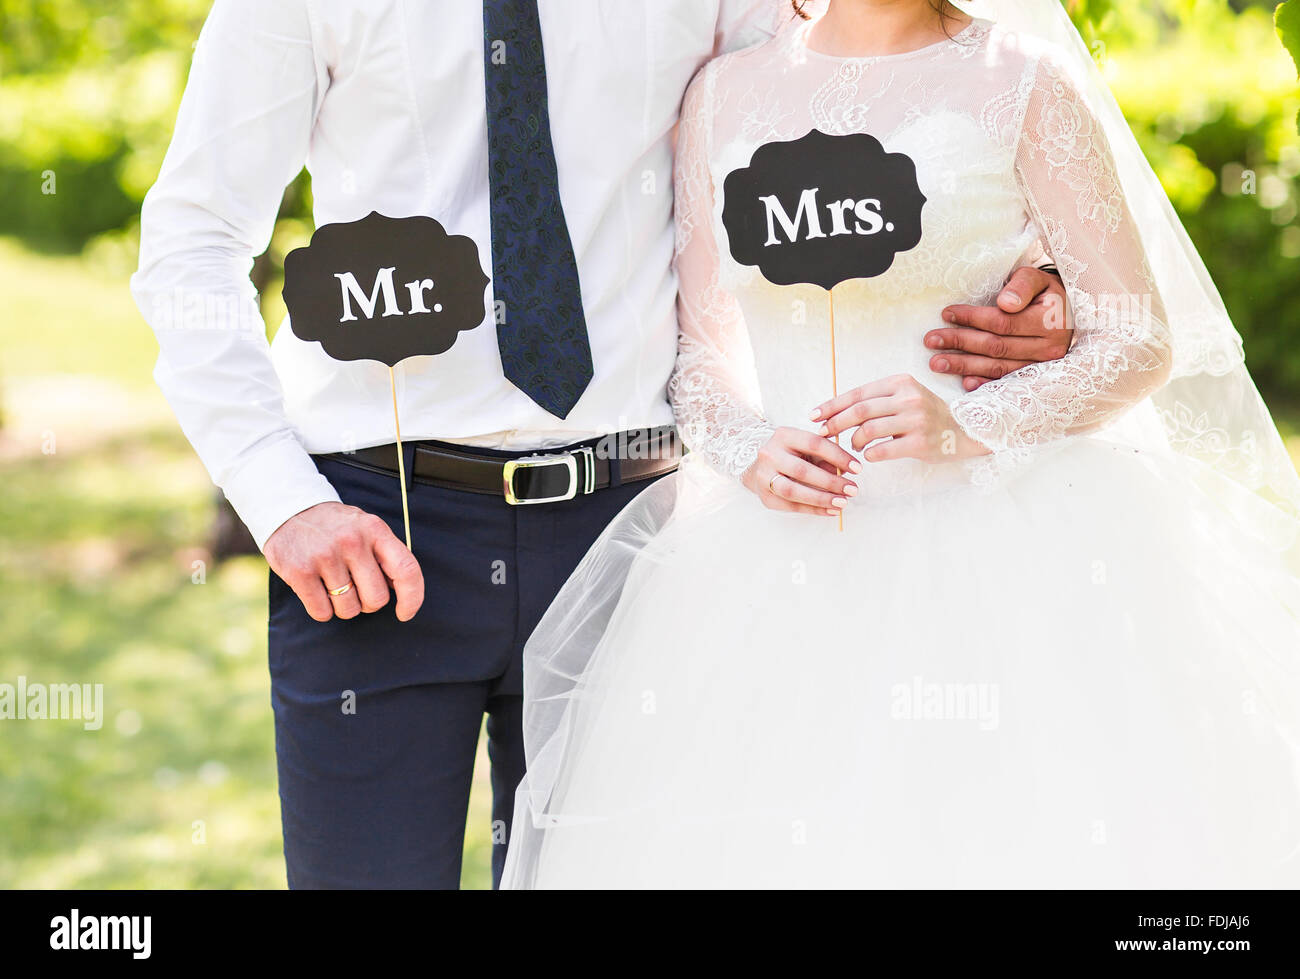 Funny bride and groom with Mr and Mrs signs. Happy wedding day Stock Photo  - Alamy